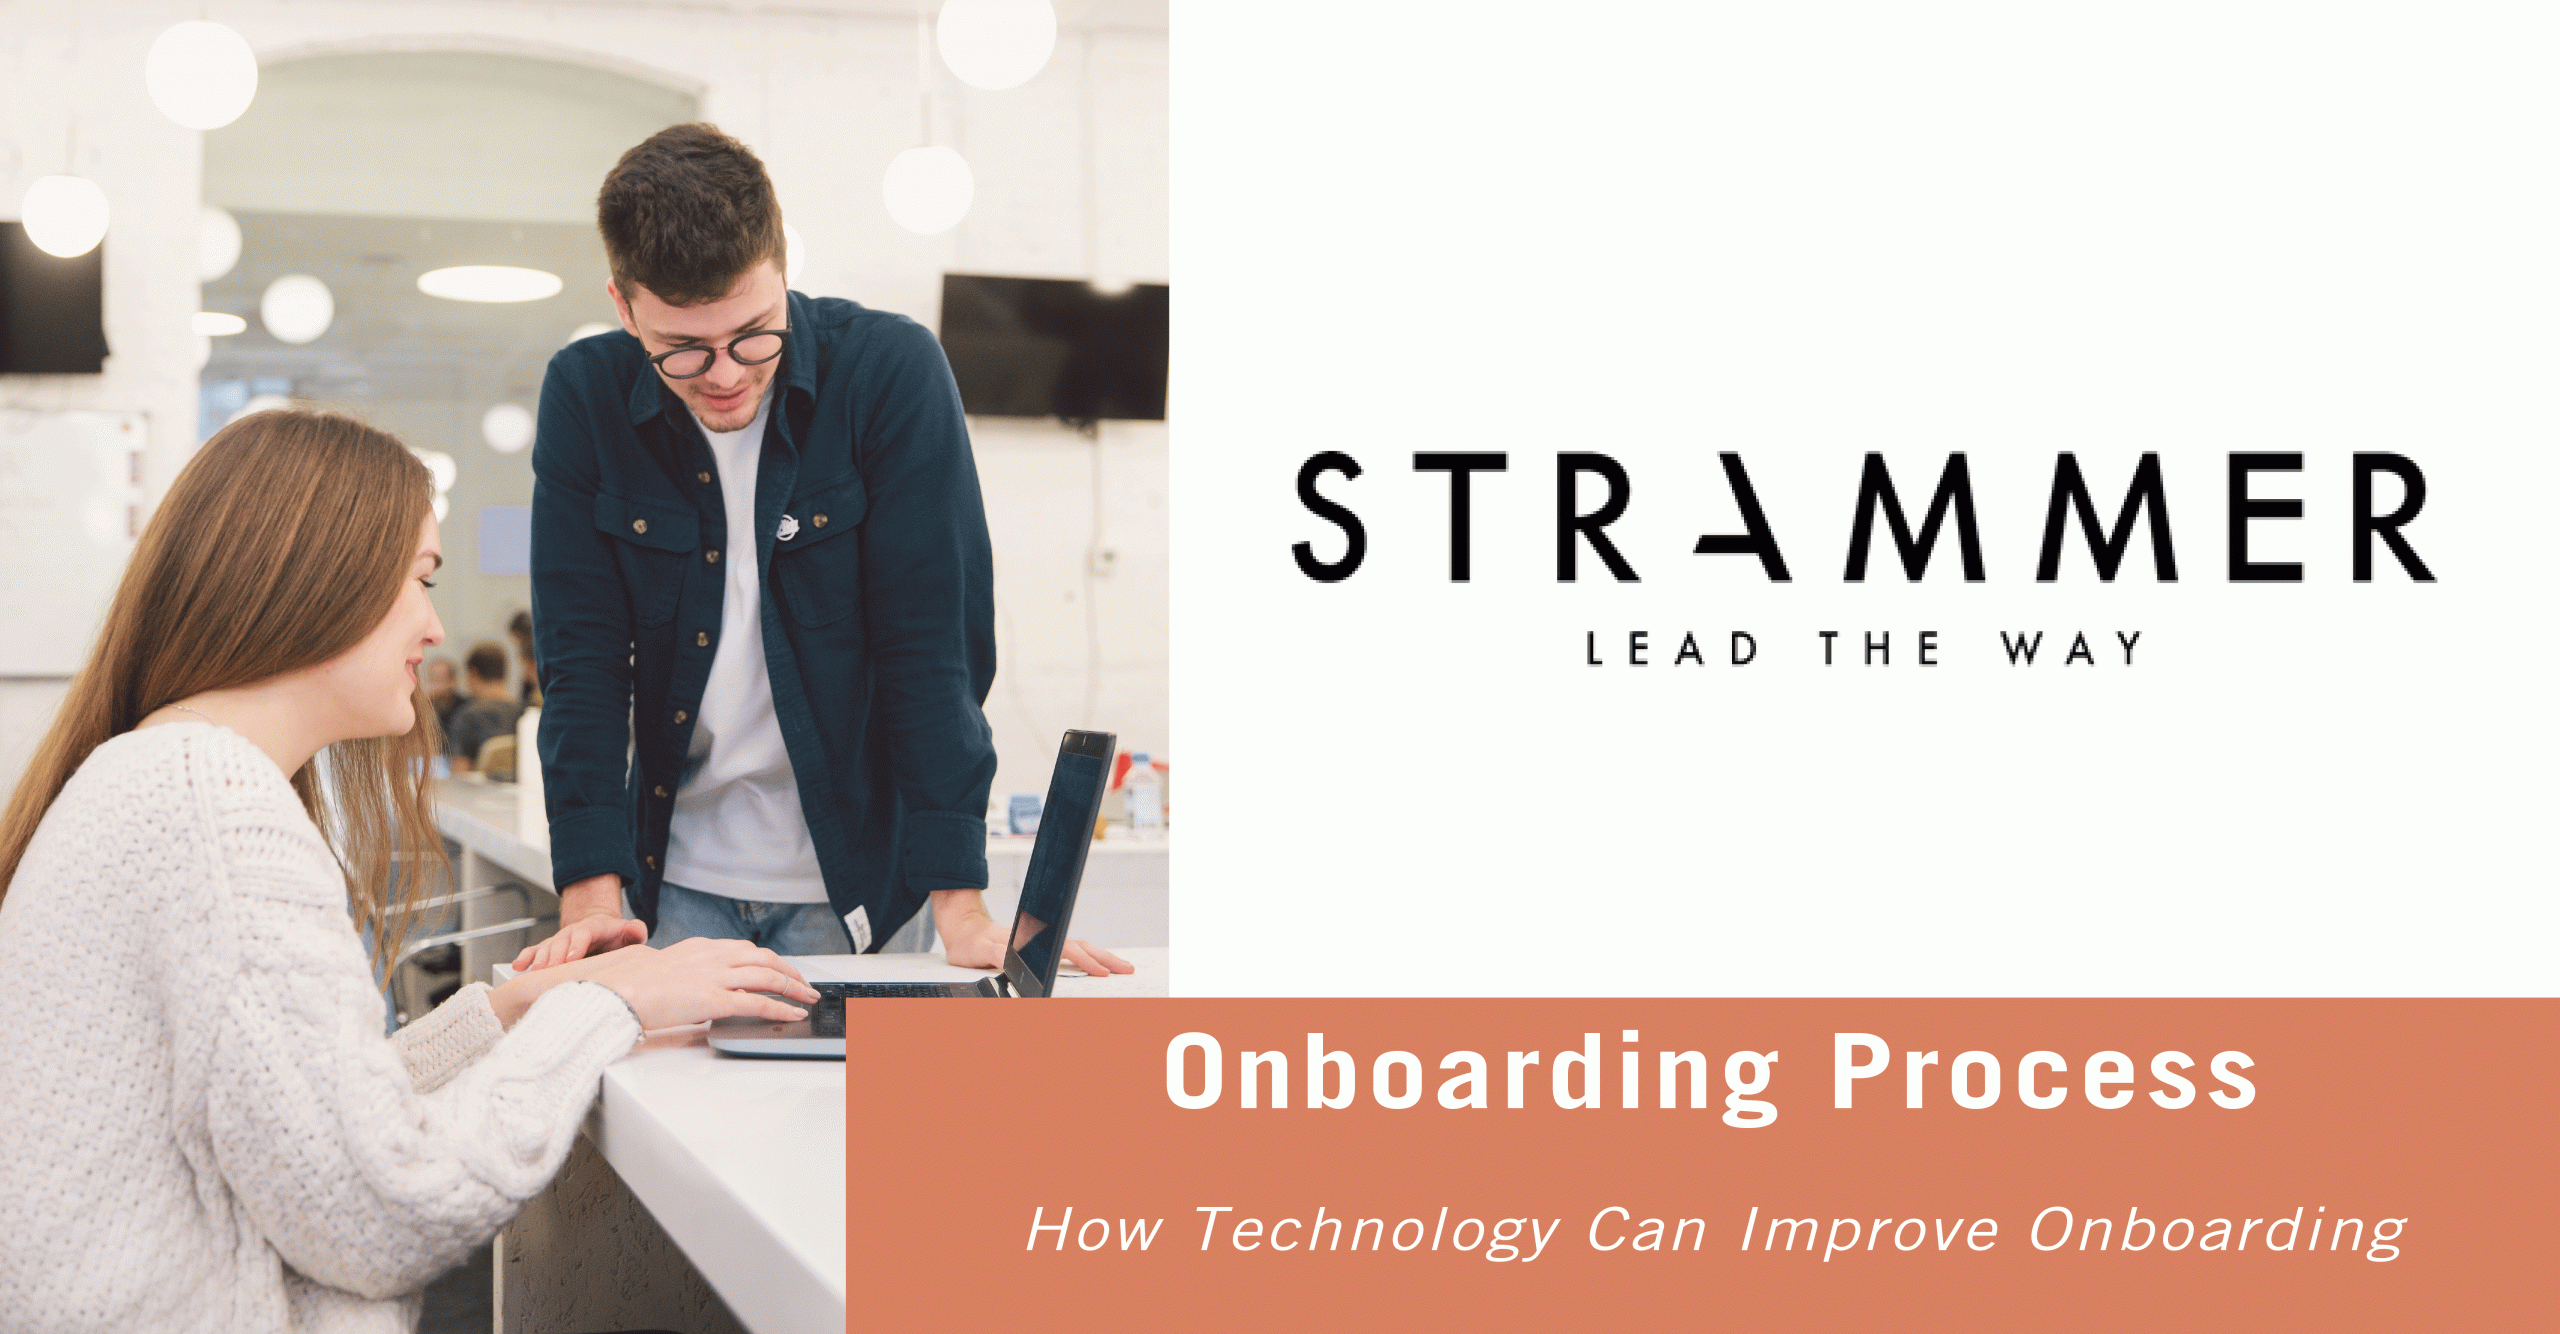 How Technology Can Improve Onboarding